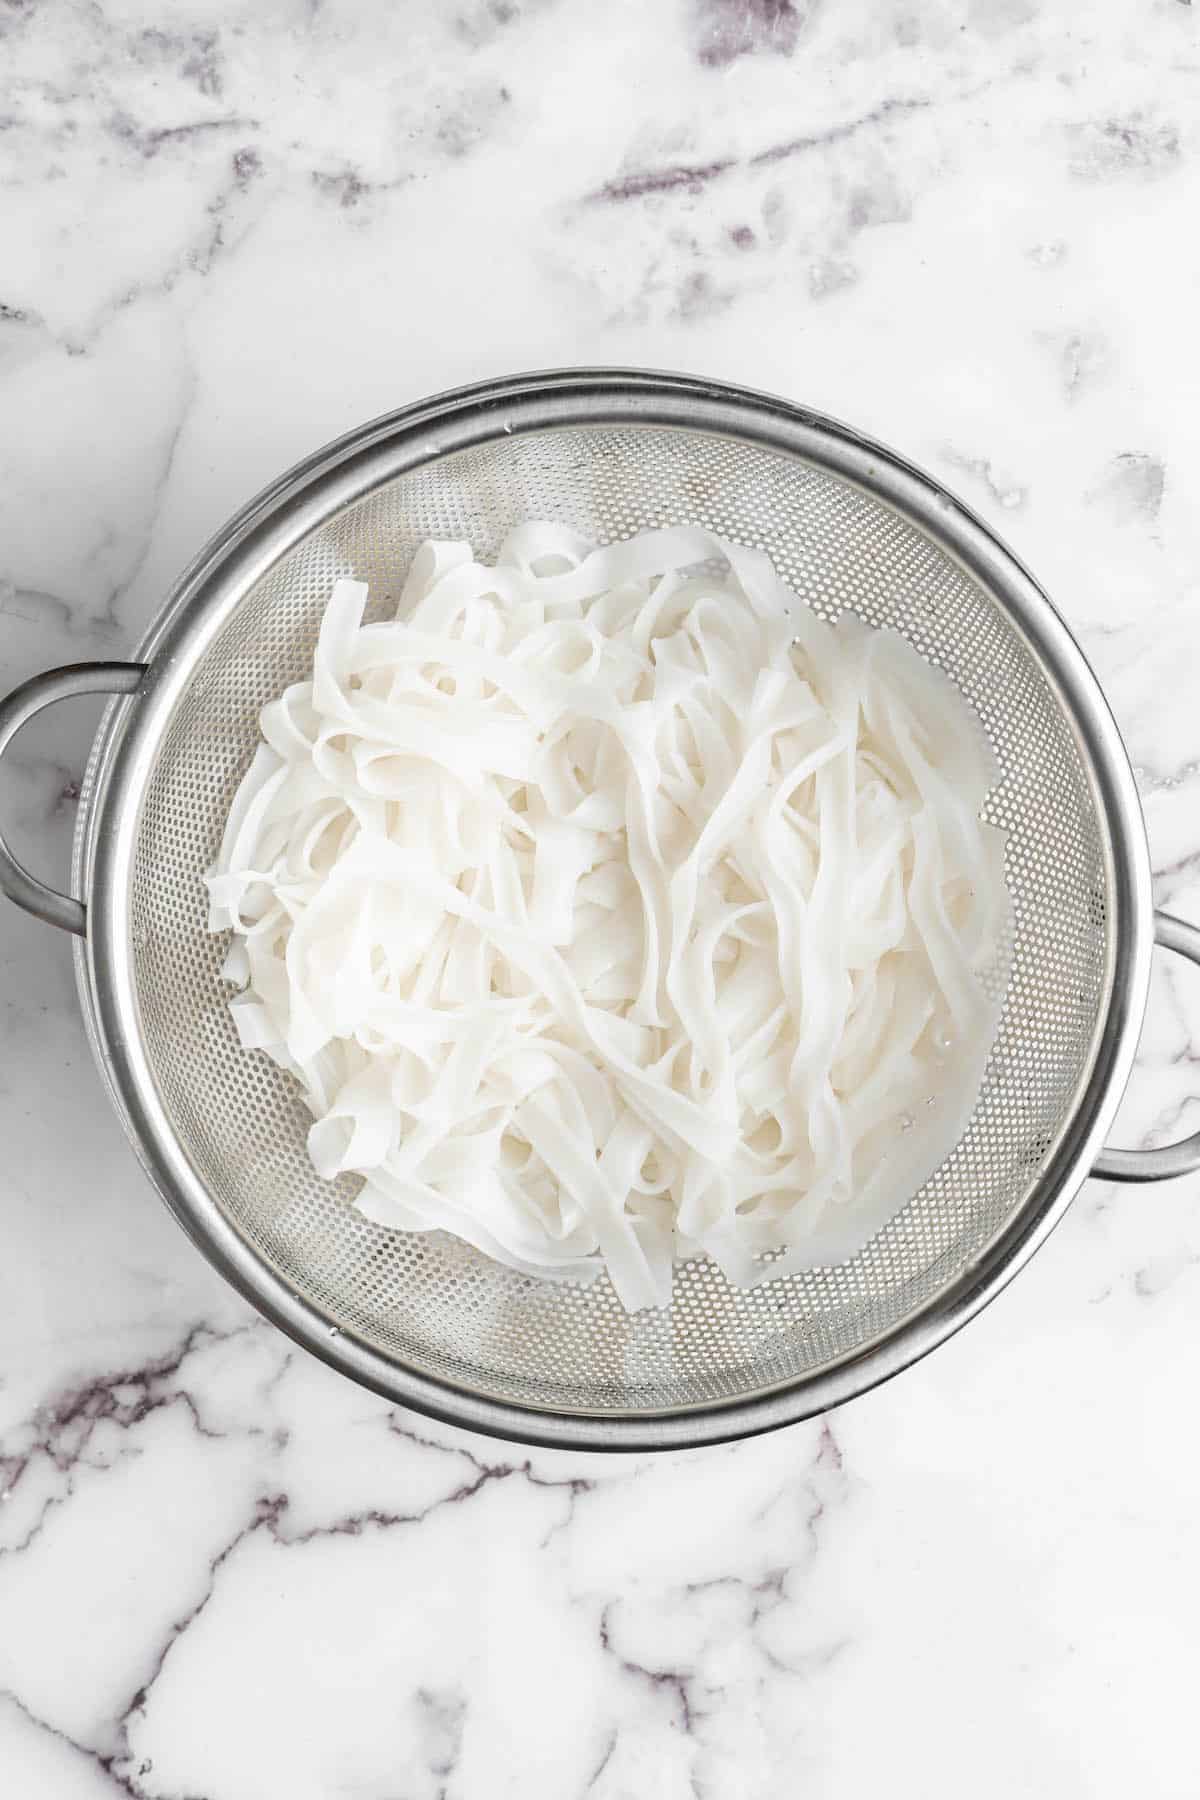 Overhead view of rice noodles in colander